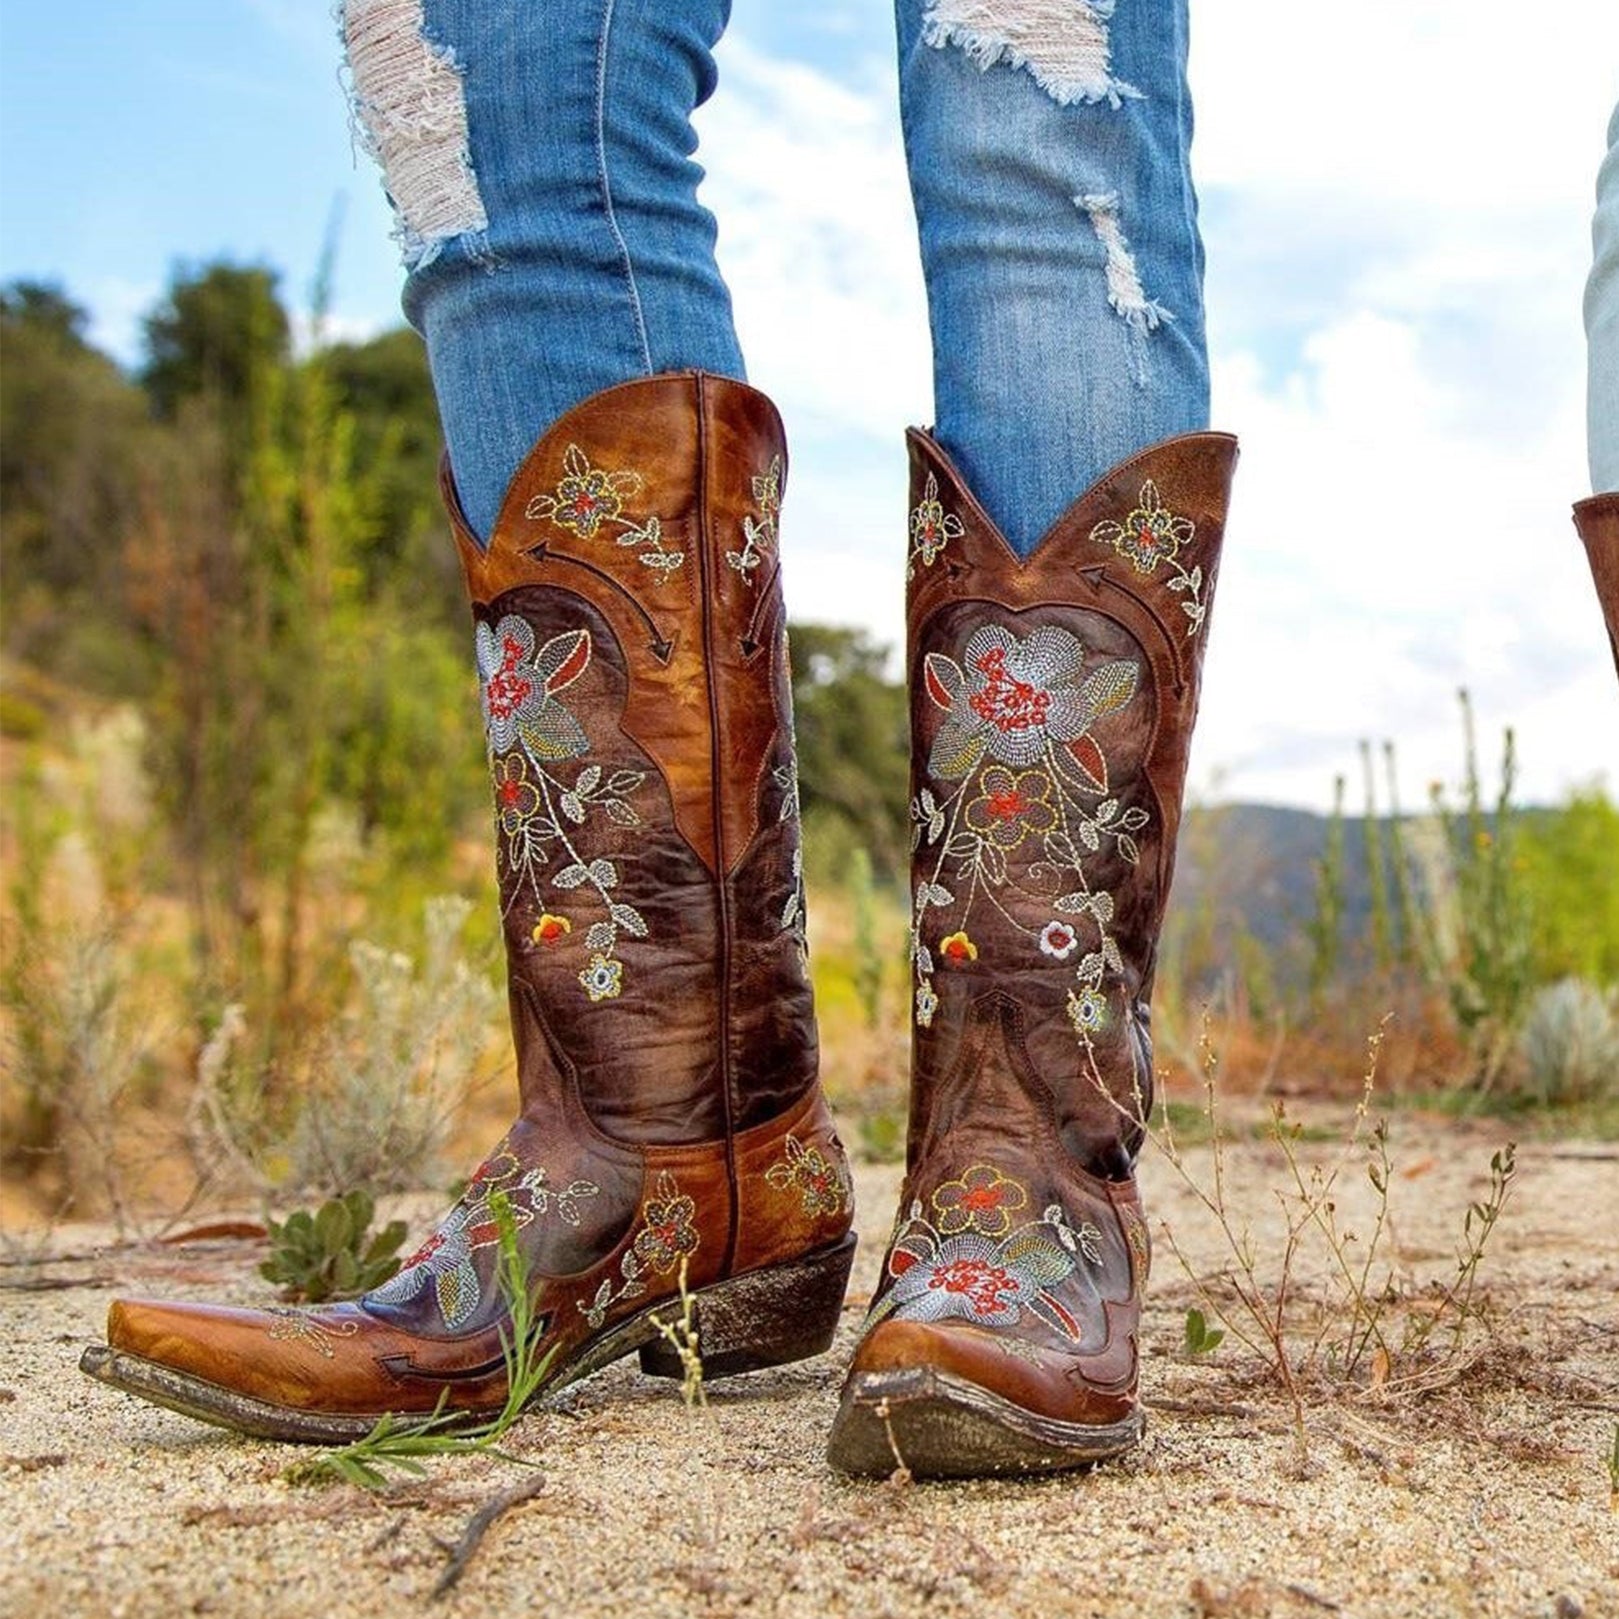 Women's Floral Embroidered Cowboy Boots | Bonnie by Old Gringo